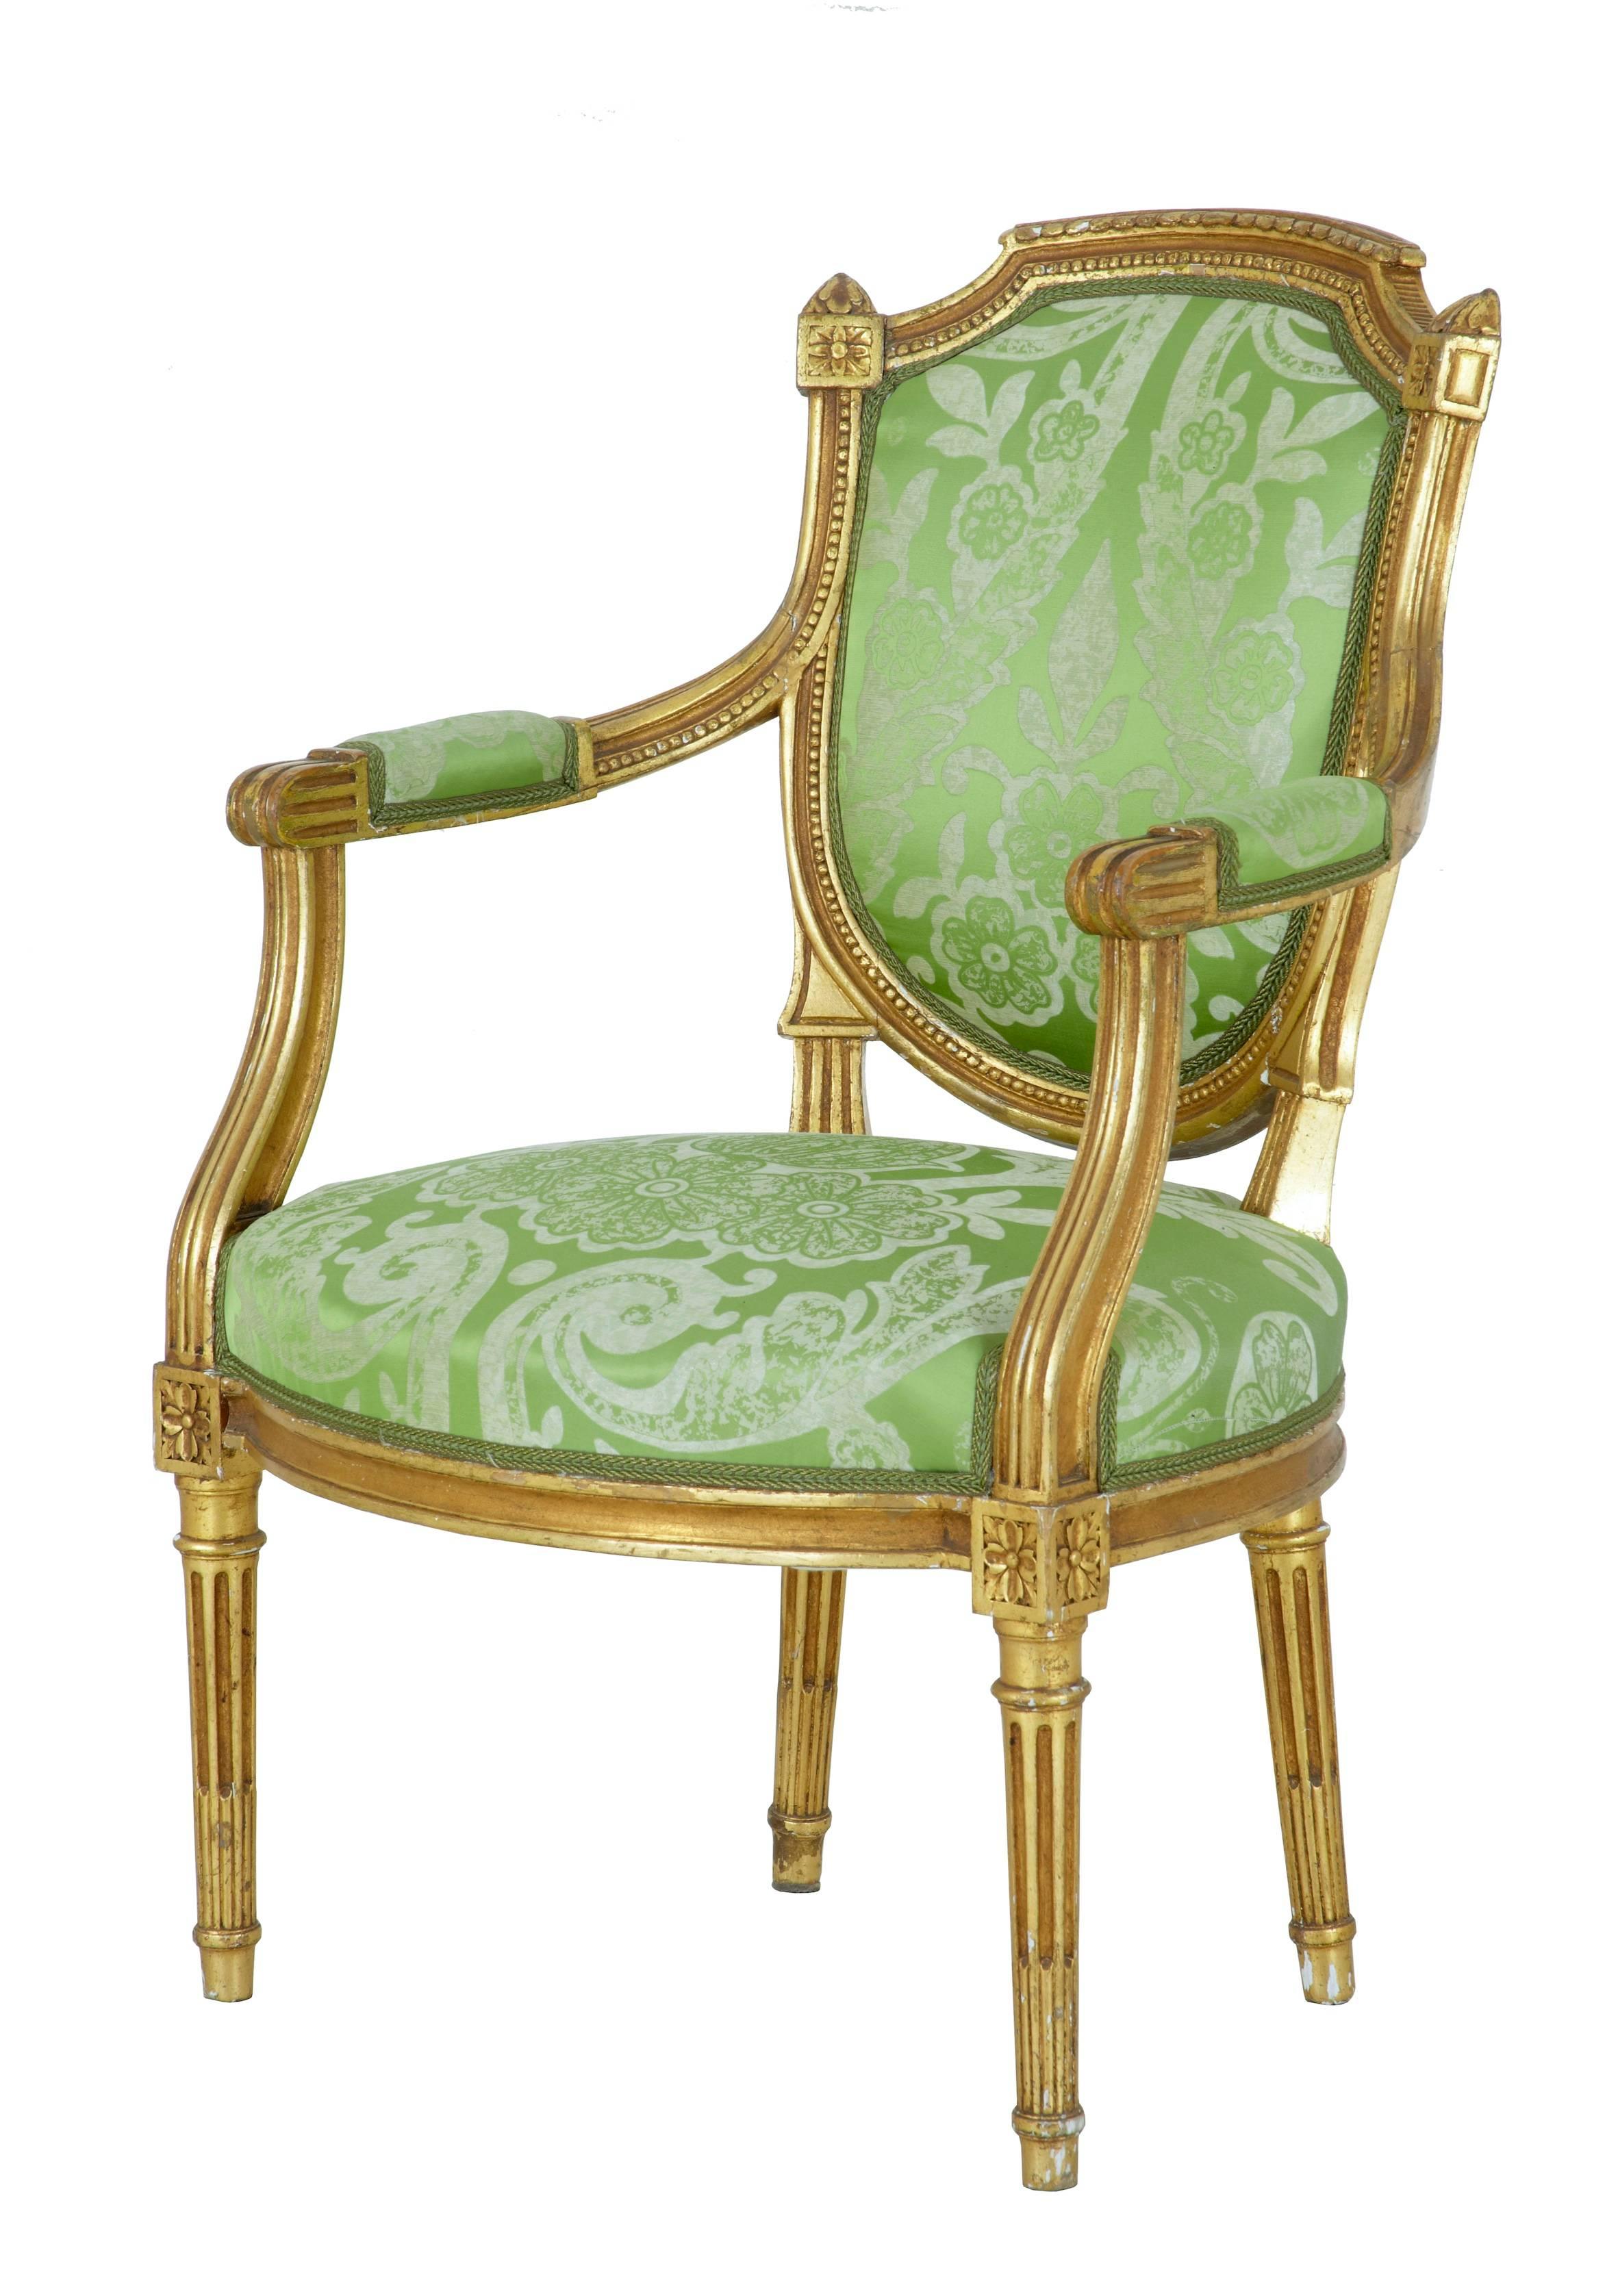 Fine set of French gilt armchairs, circa 1880.
Shaped shield back rests, over stuffed seats, standing on channelled legs.
Upholstered in striking two-tone green material, which is in good order.
Minor gilt and gesso losses.

Measures: Height: